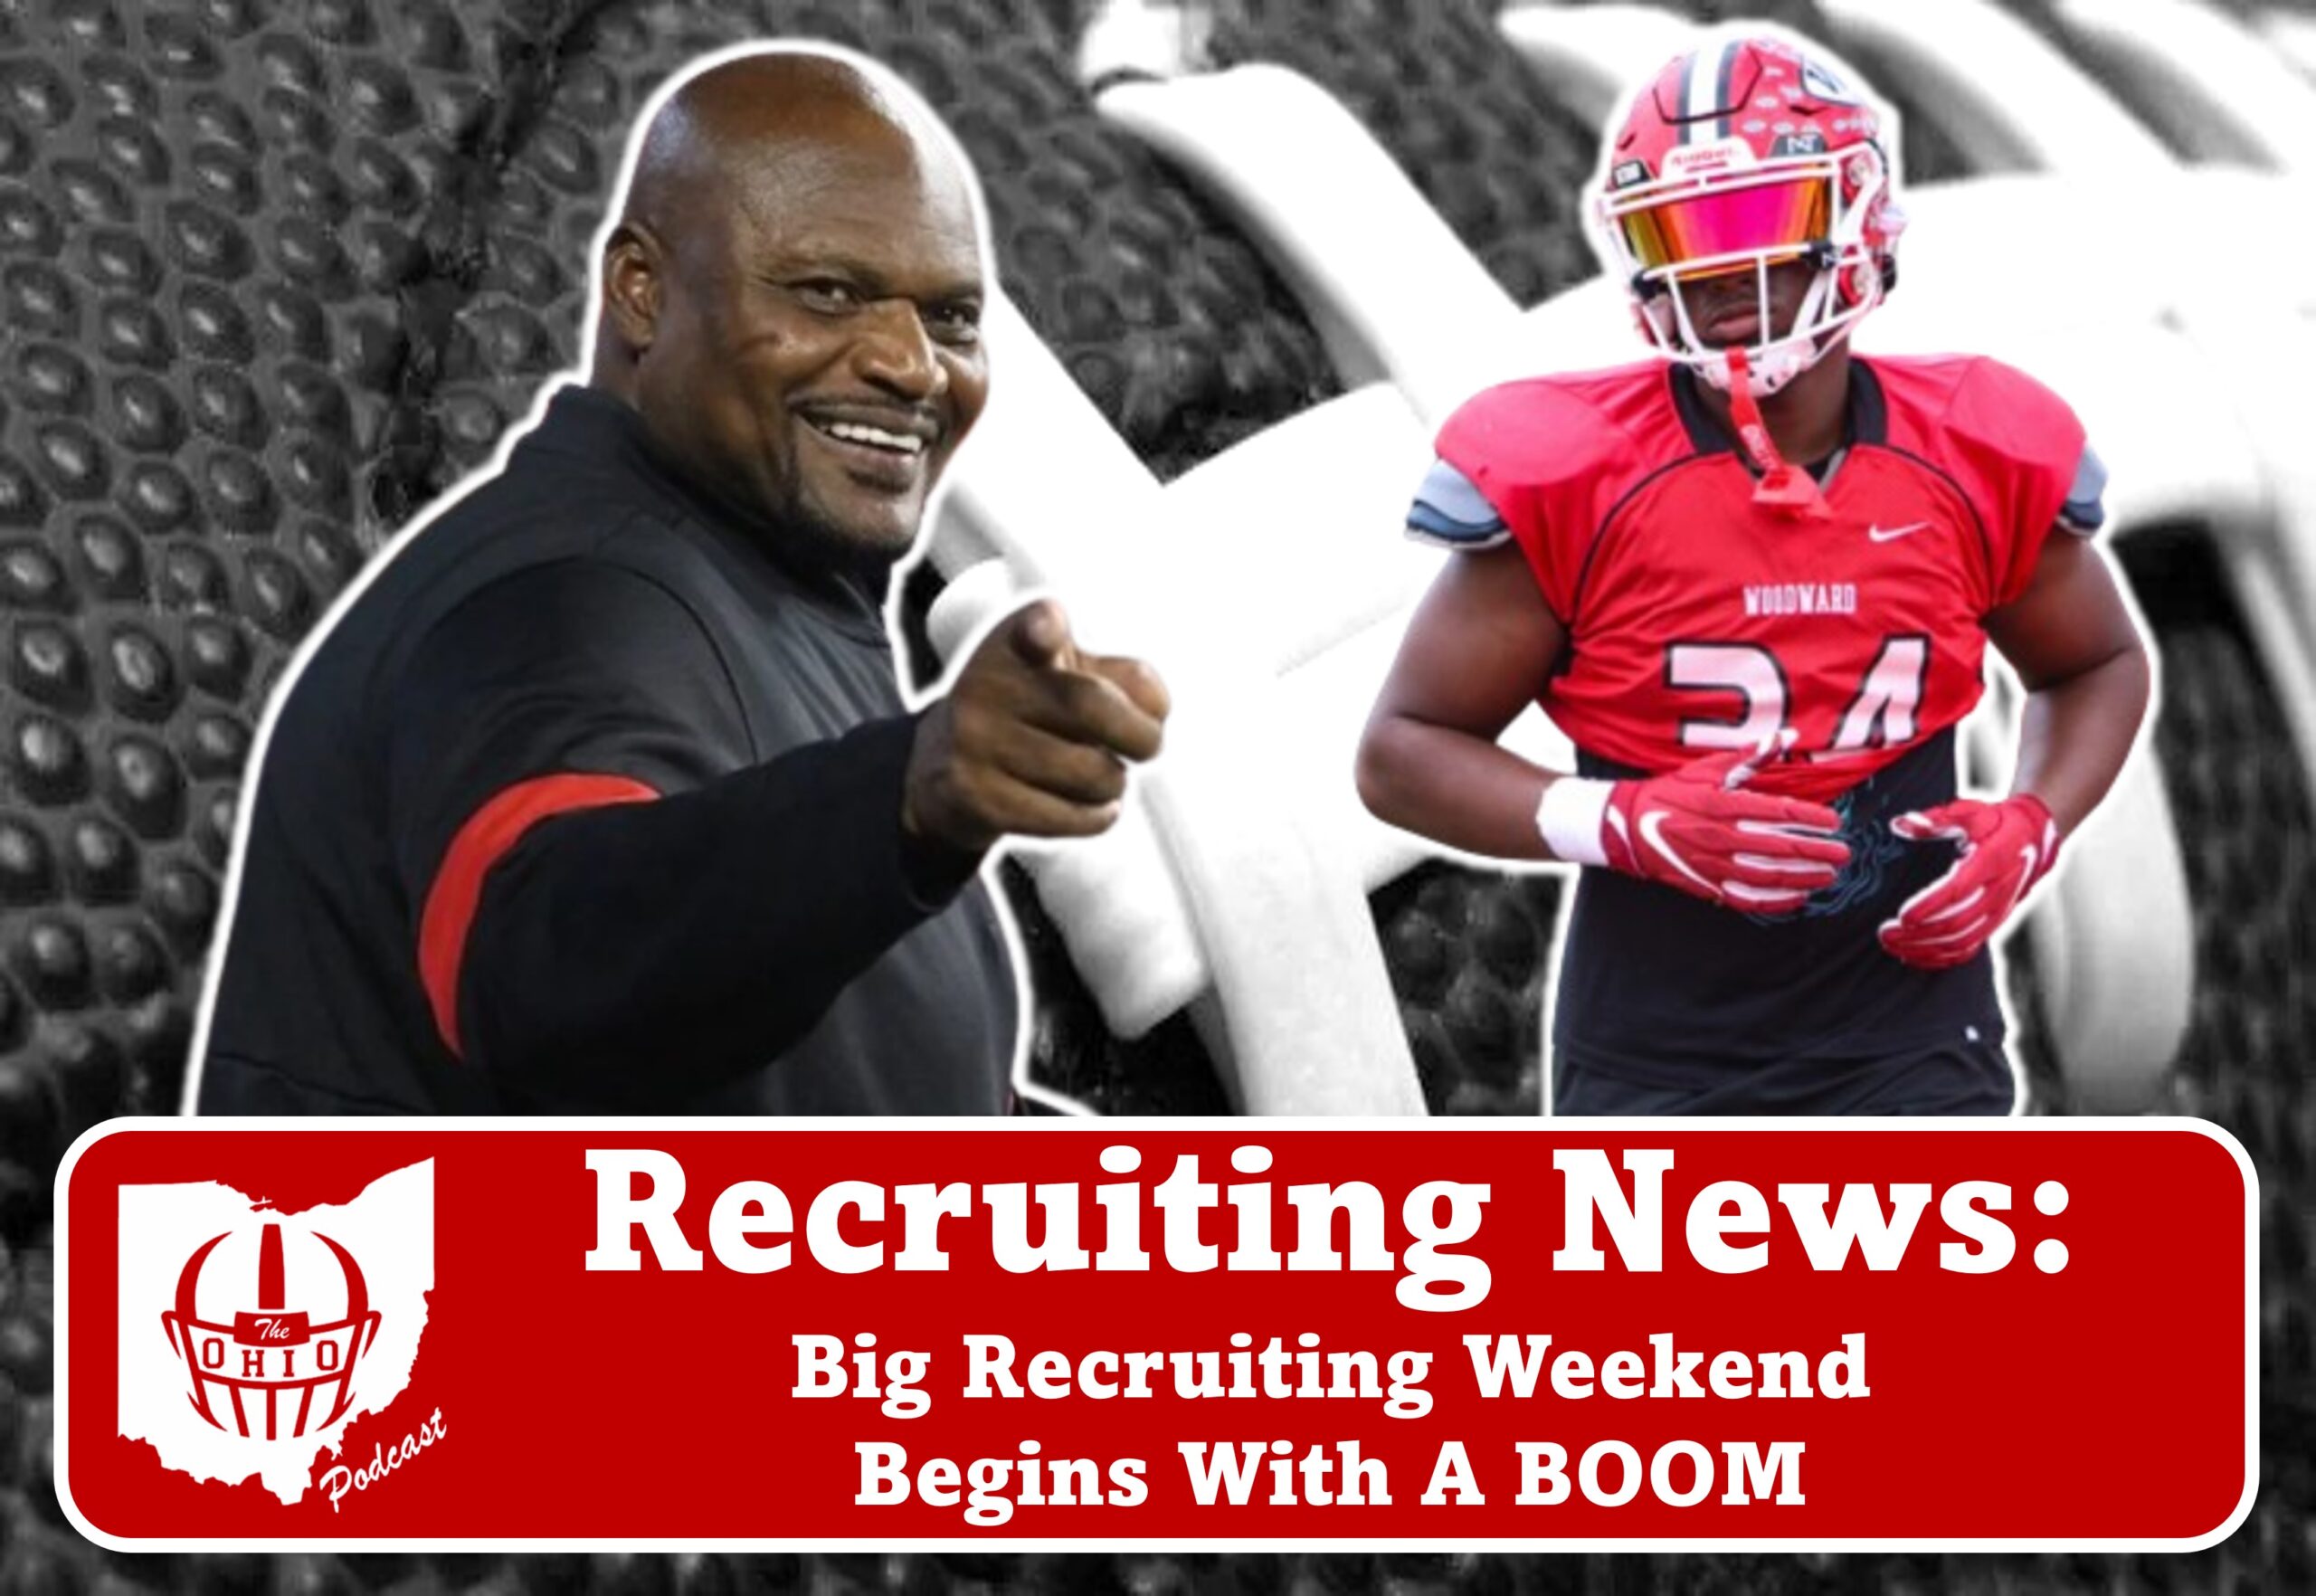 Big Recruiting Weekend Begins With A BOOM